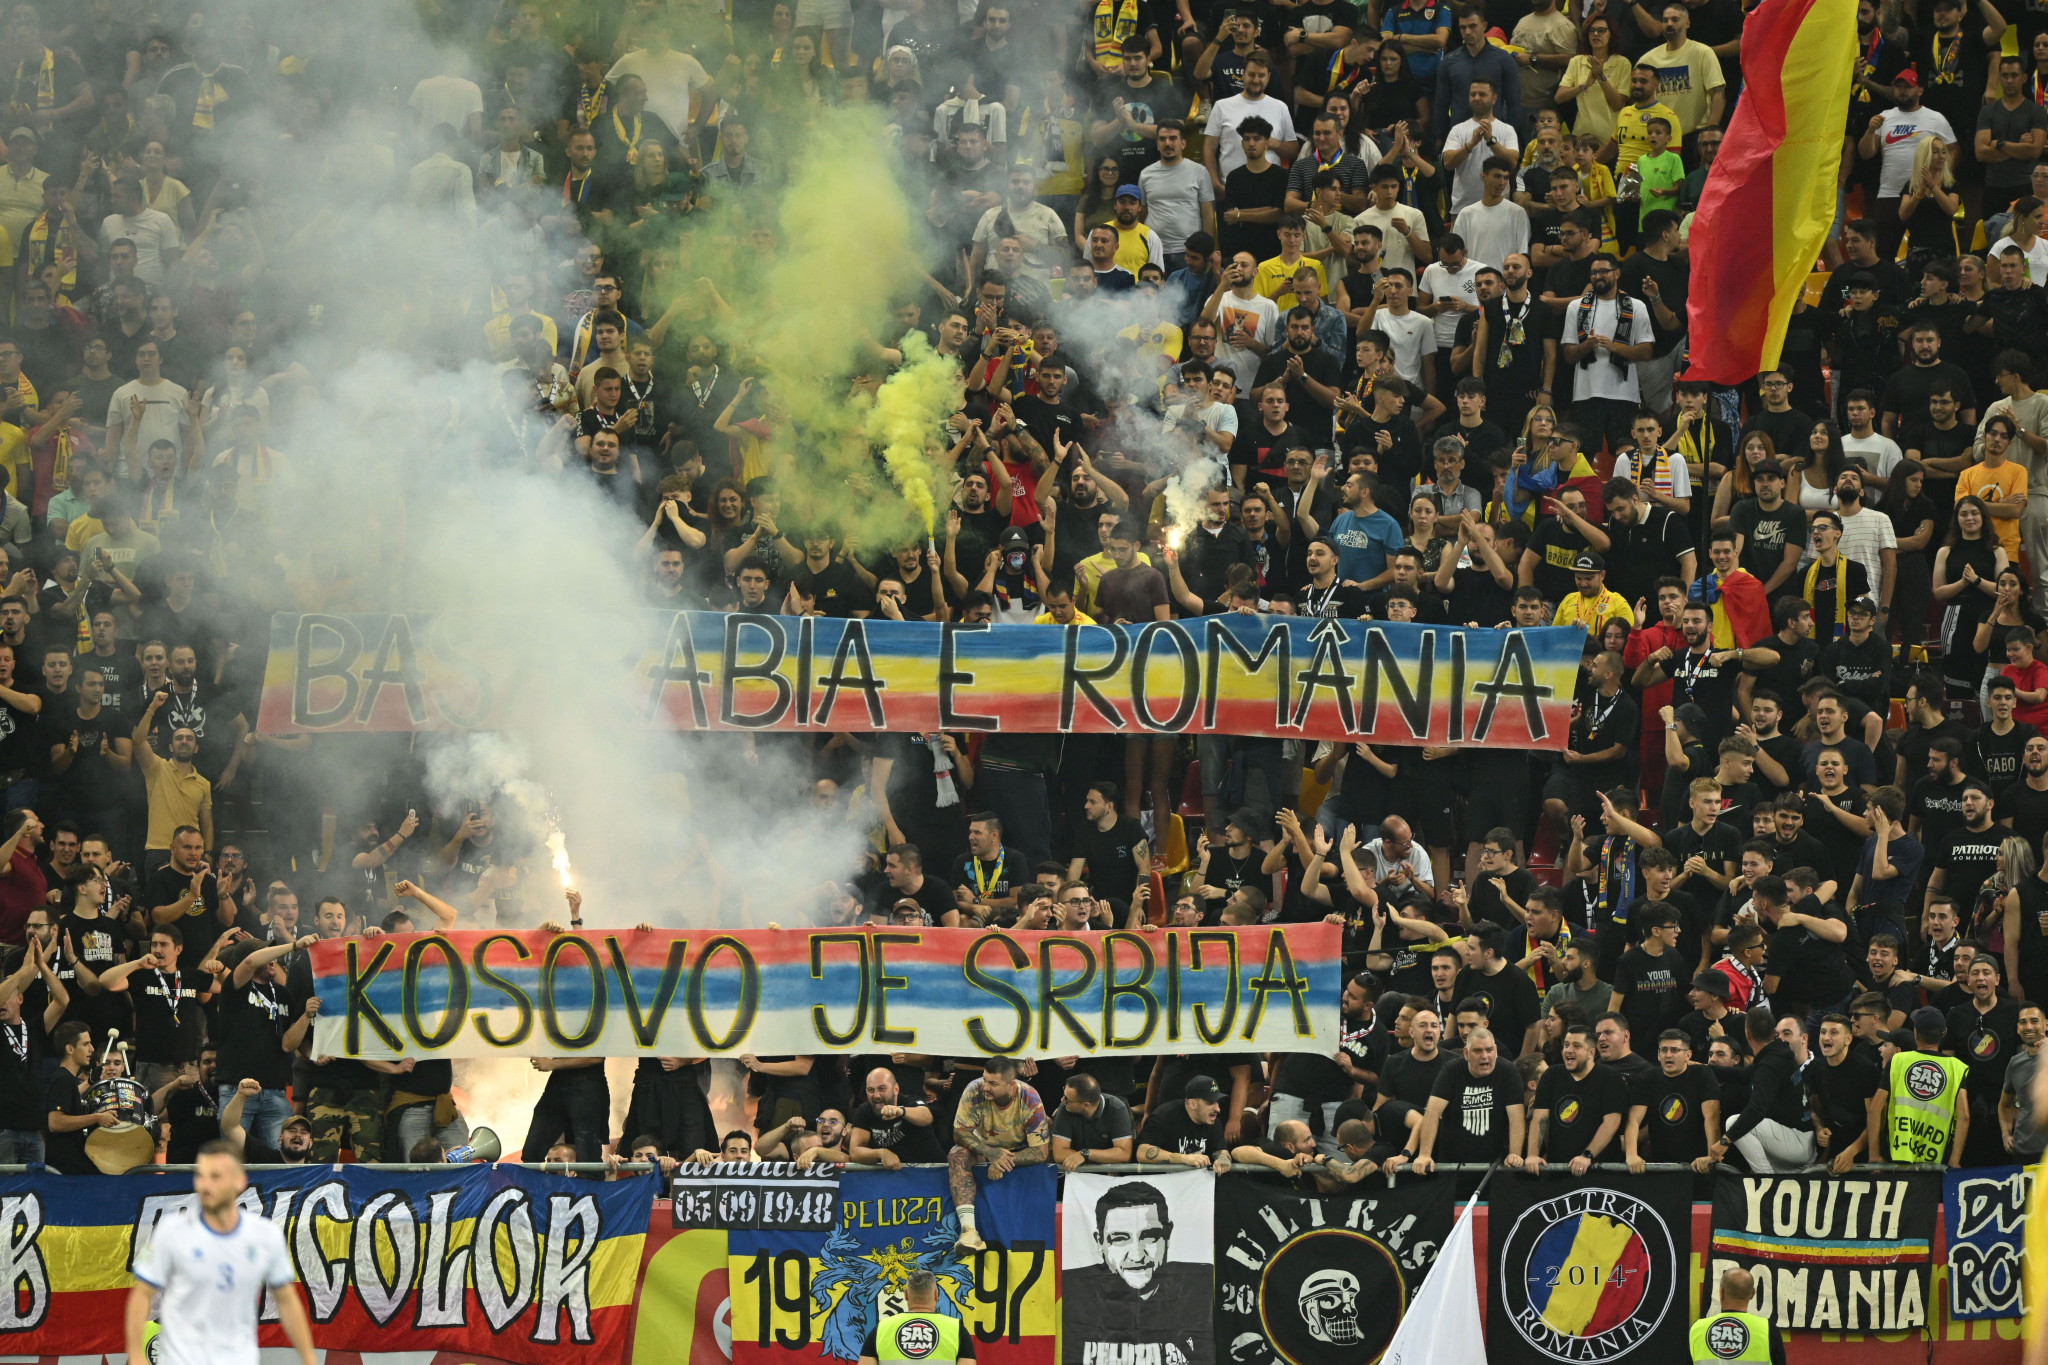 UEFA Euro 2024 qualifier in Romania halted after "Kosovo is Serbia" chants